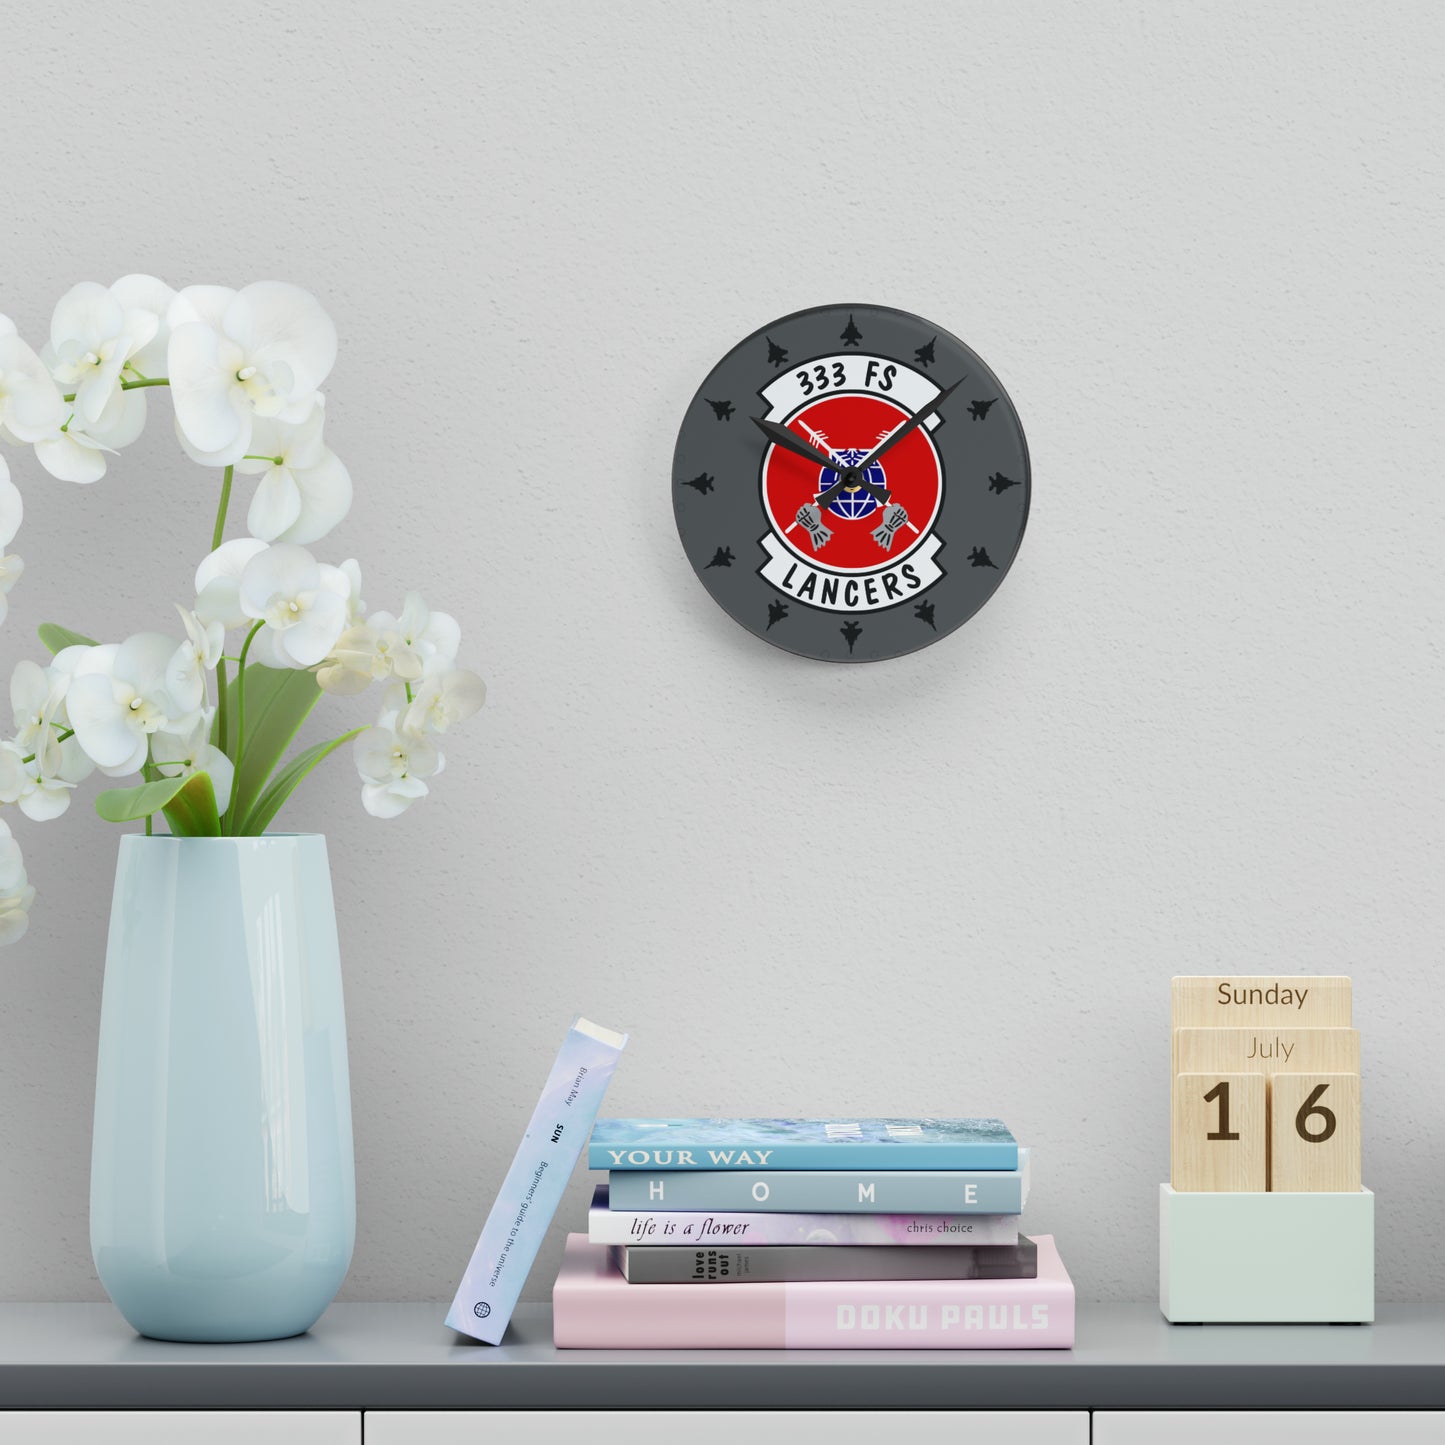 333FS "Lancers" Acrylic Wall Clock, Round or Square Options